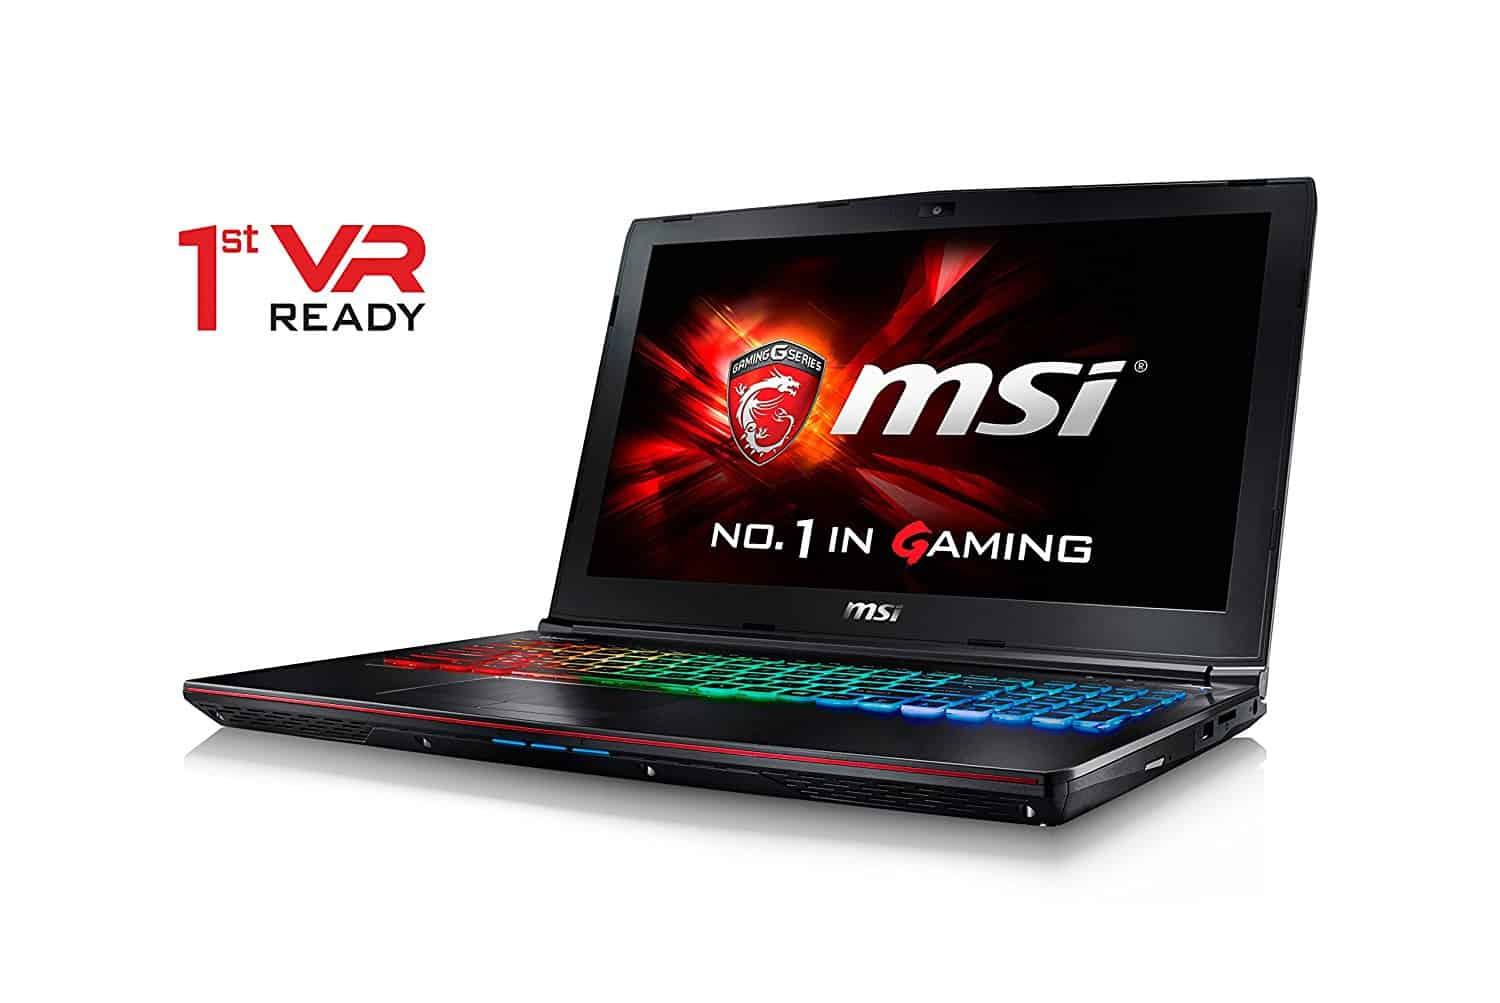 Best Gaming Laptop Under $1500 – Editor’s Choice 2018